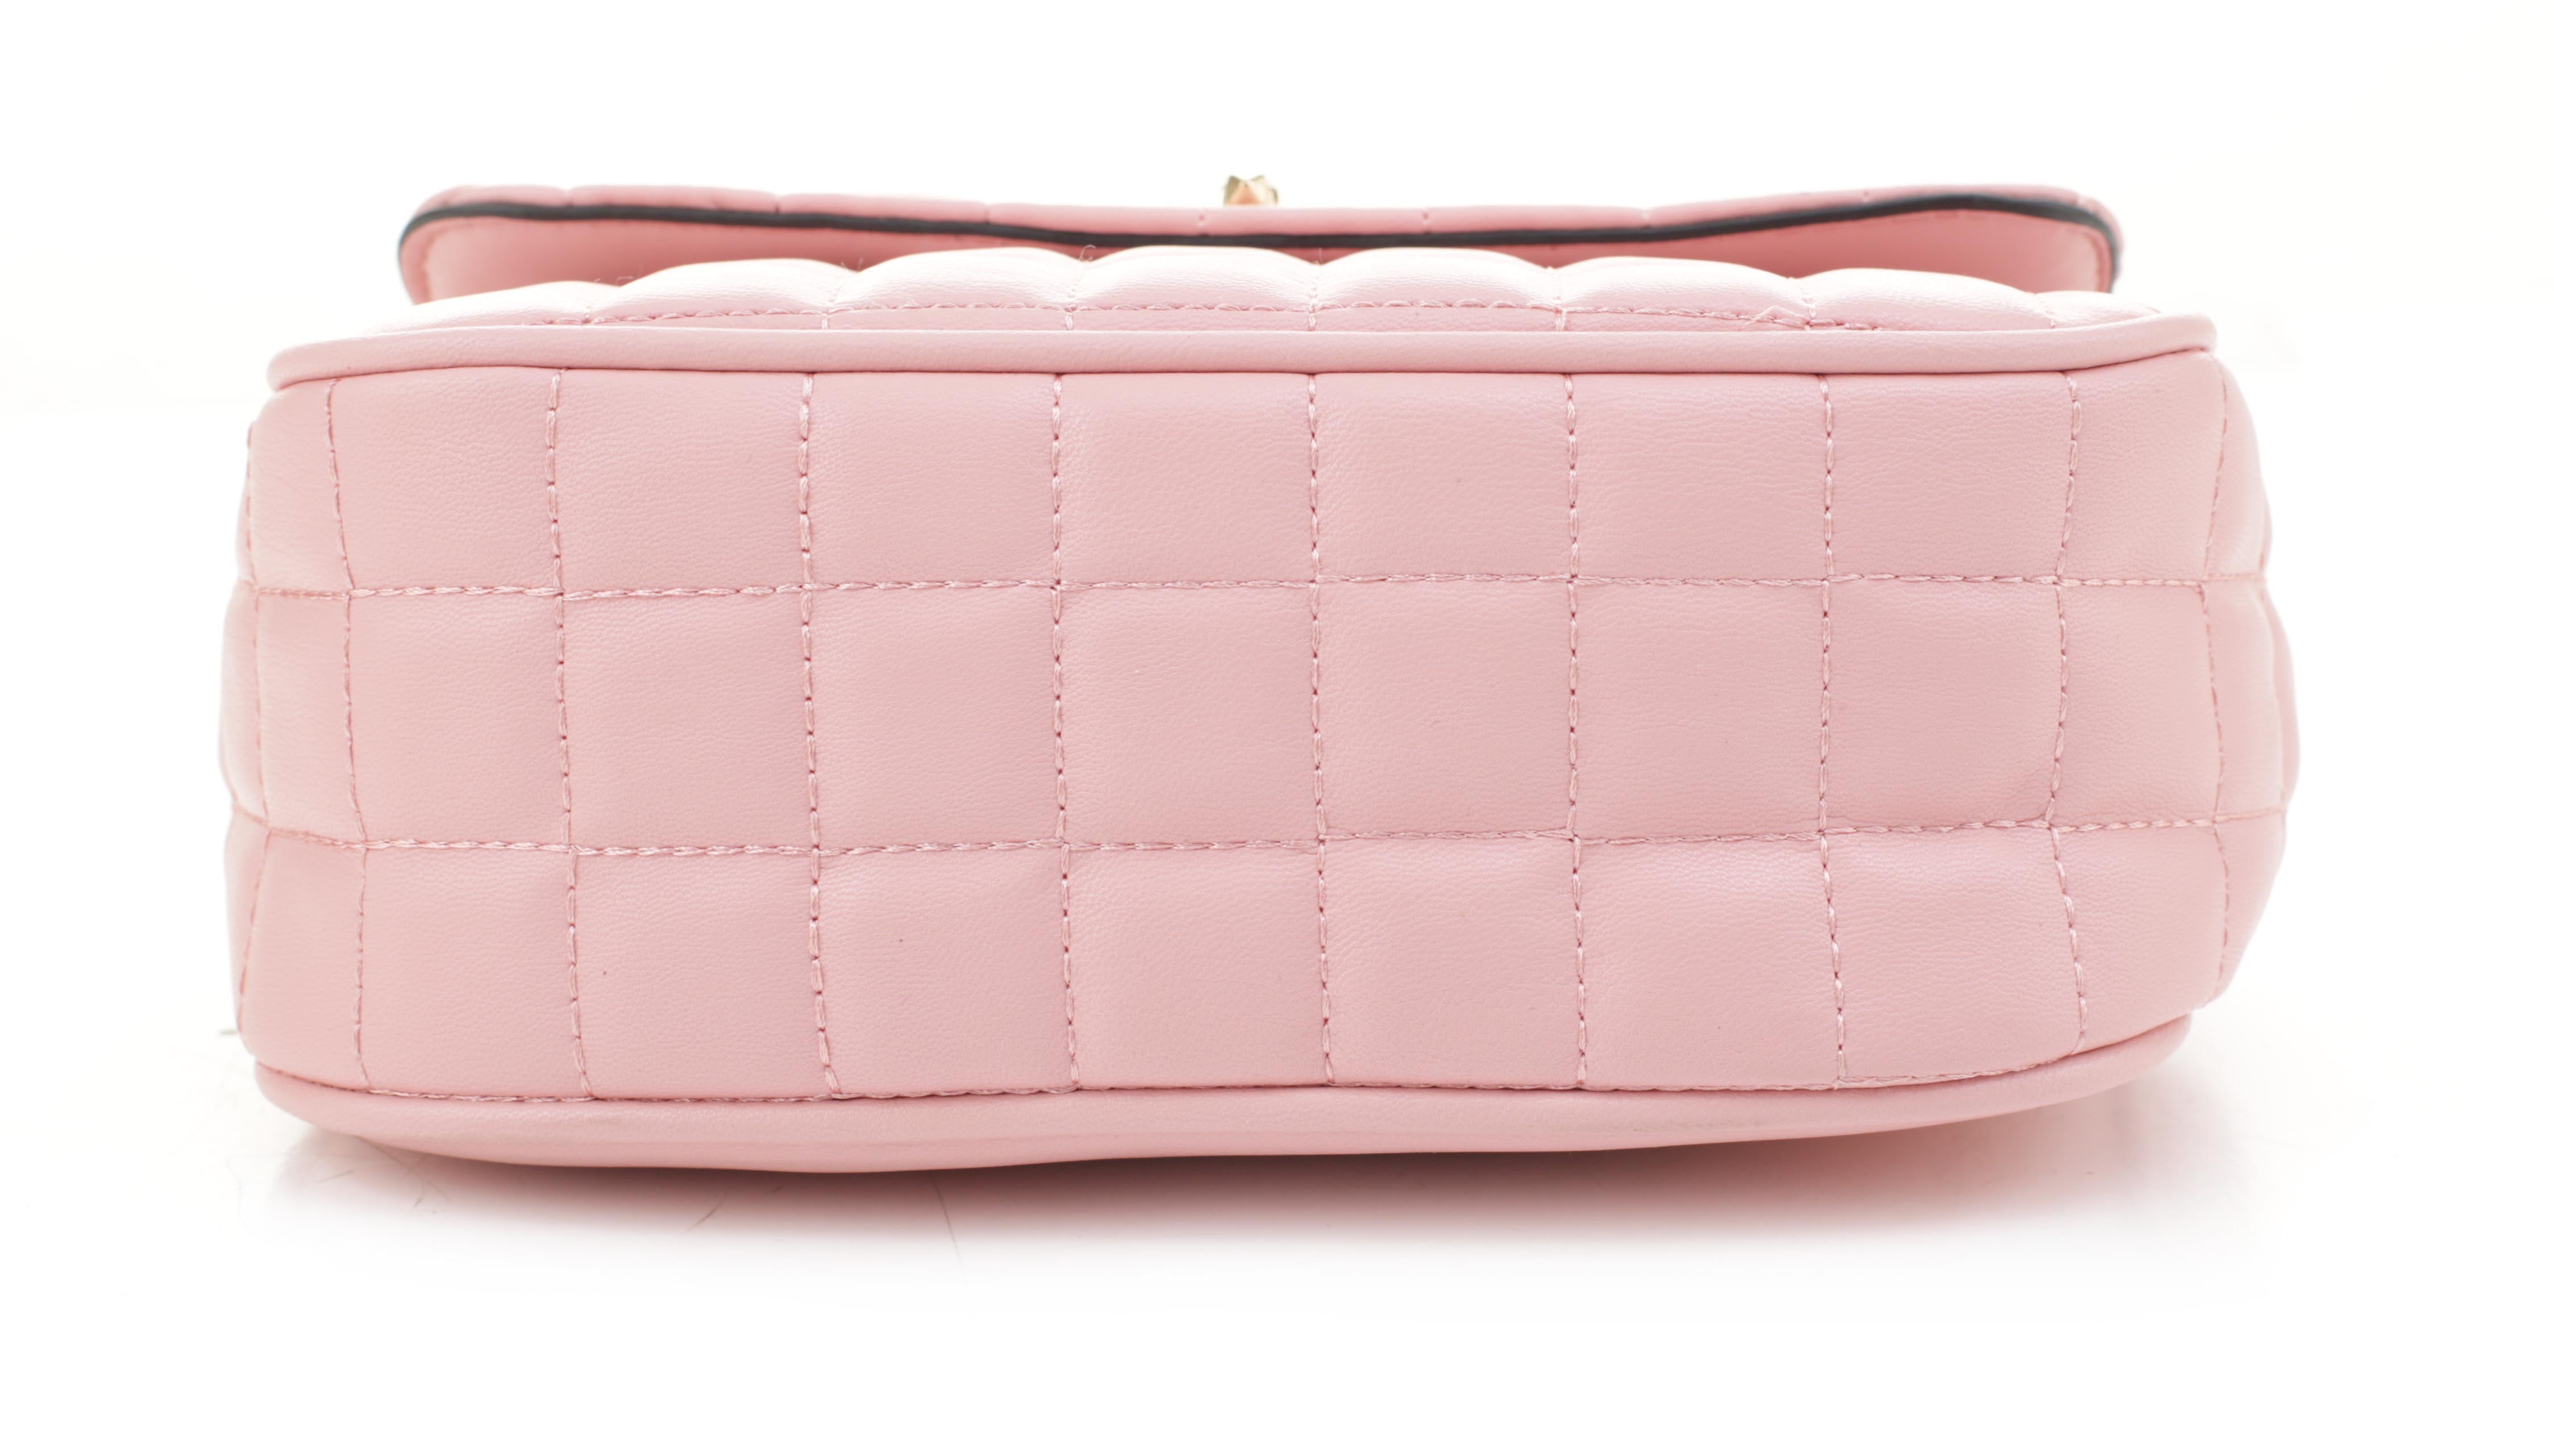 Women's RFID Card Holder Coin Purse | Pink Soft Leather with Zipper | by CG of London